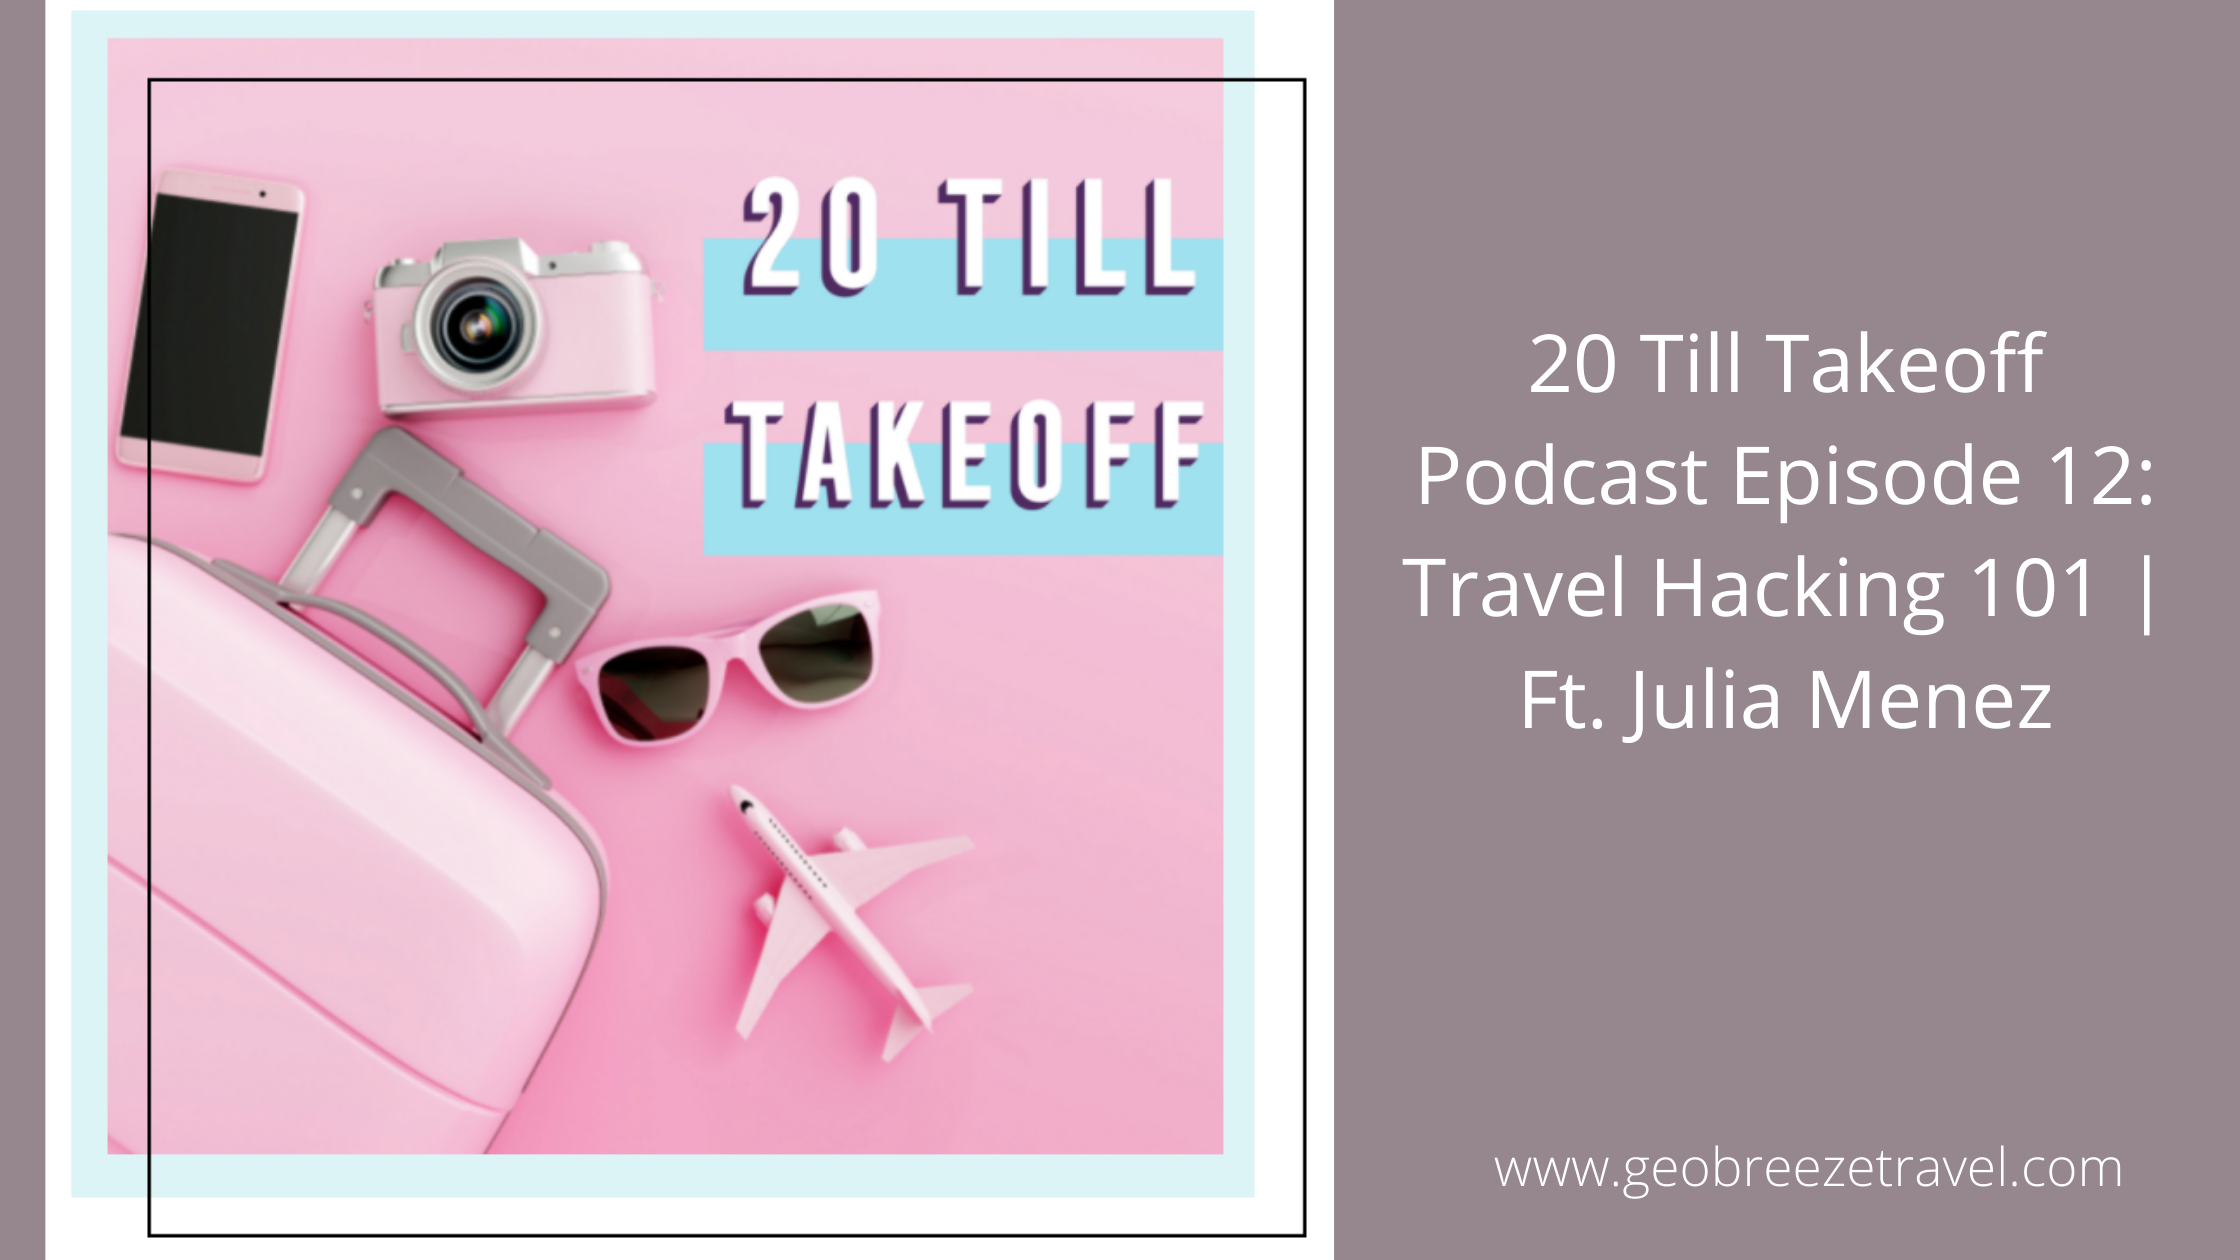 Podcast Feature: 20 Till Takeoff: Travel Hacking 101 | Ft. Julia Menez